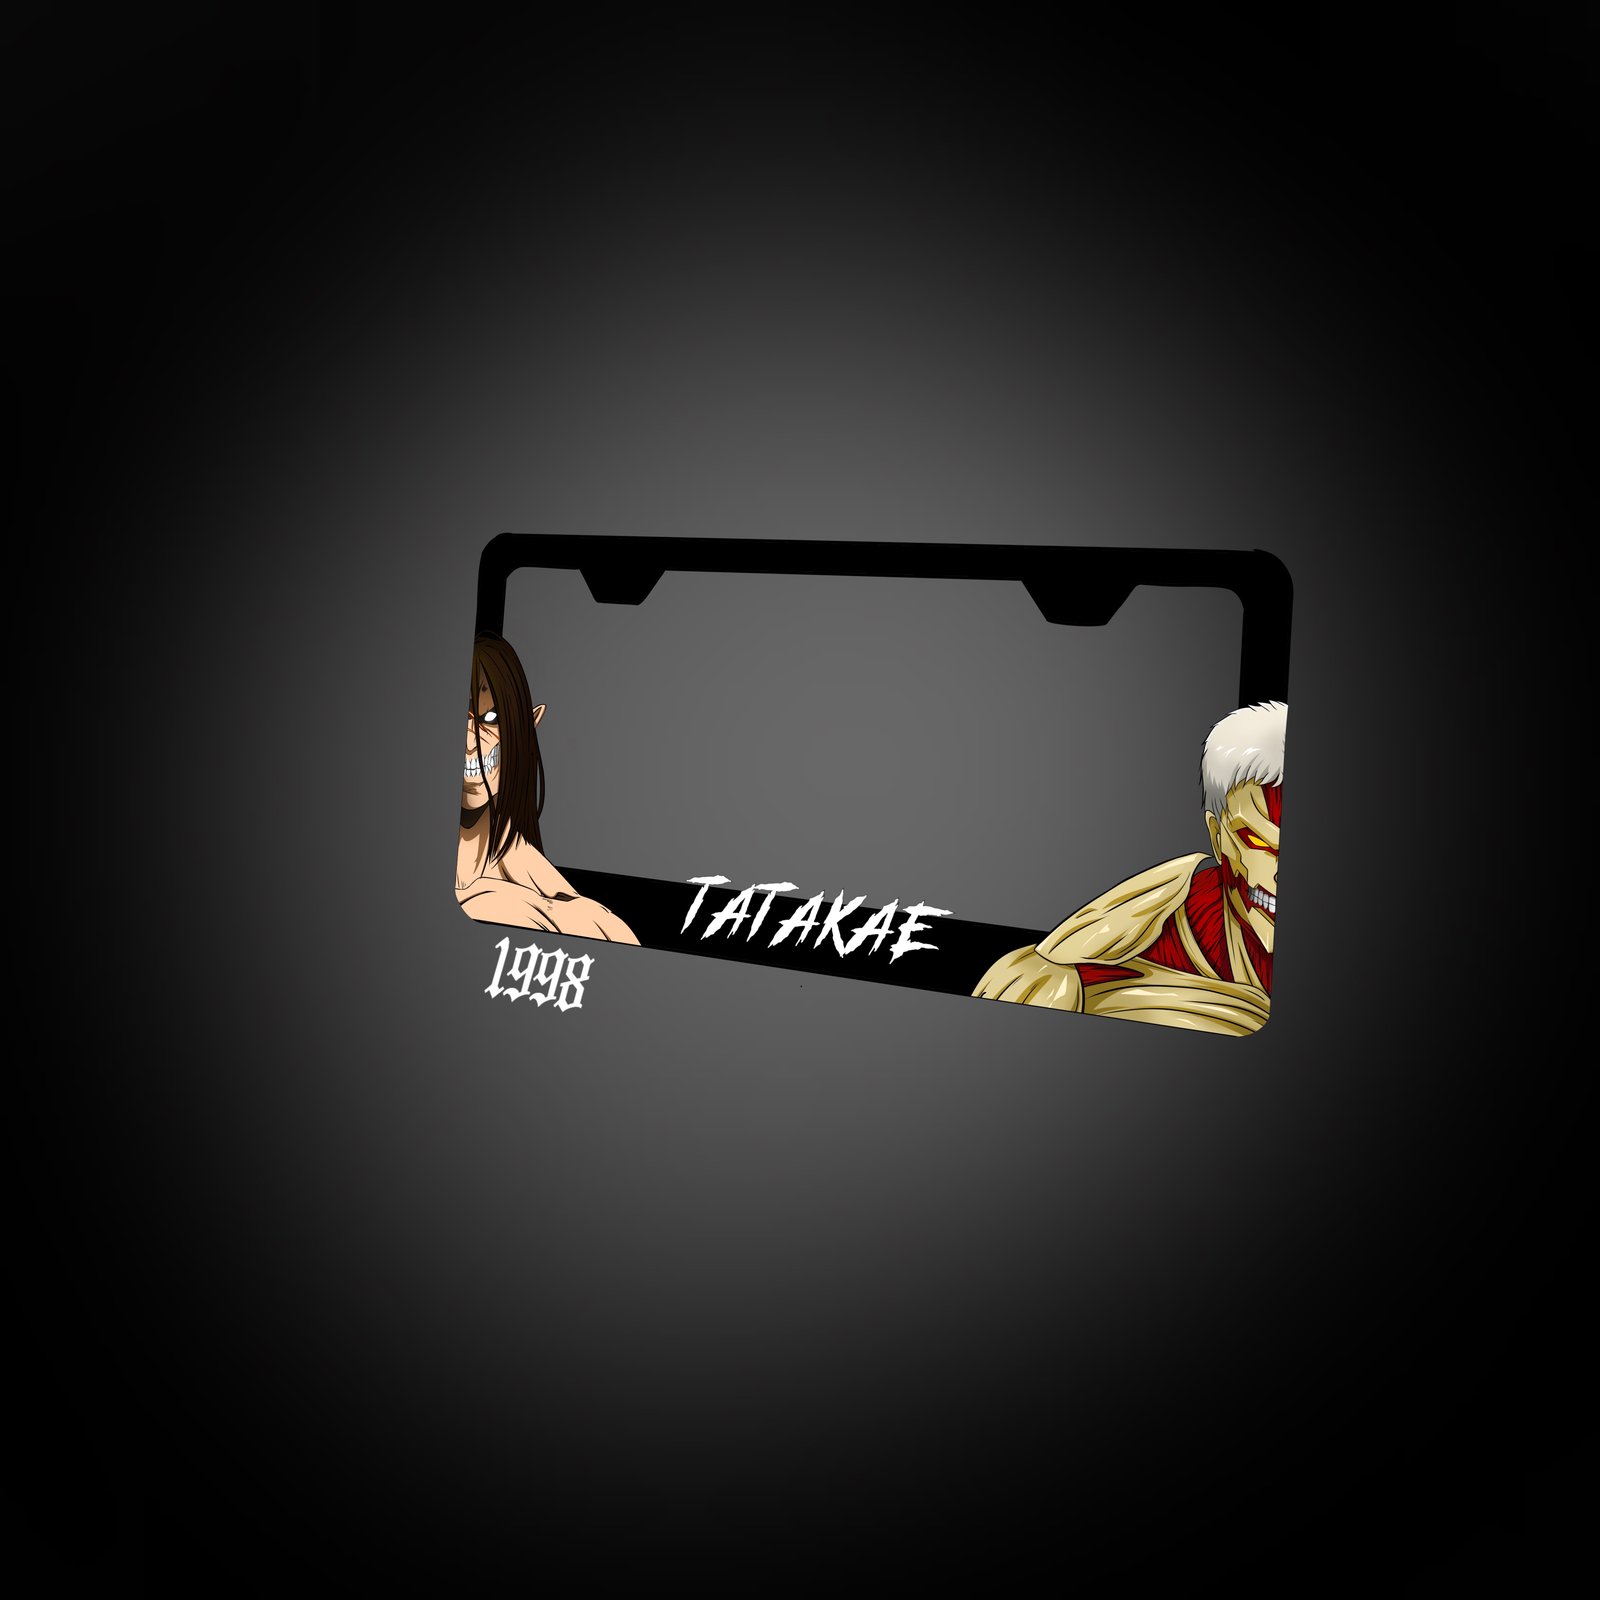 Source JDM 3D Emboss License Plate Frame License Tag Cover Custom Anime  Number License Plate For Universal on m.alibaba.com